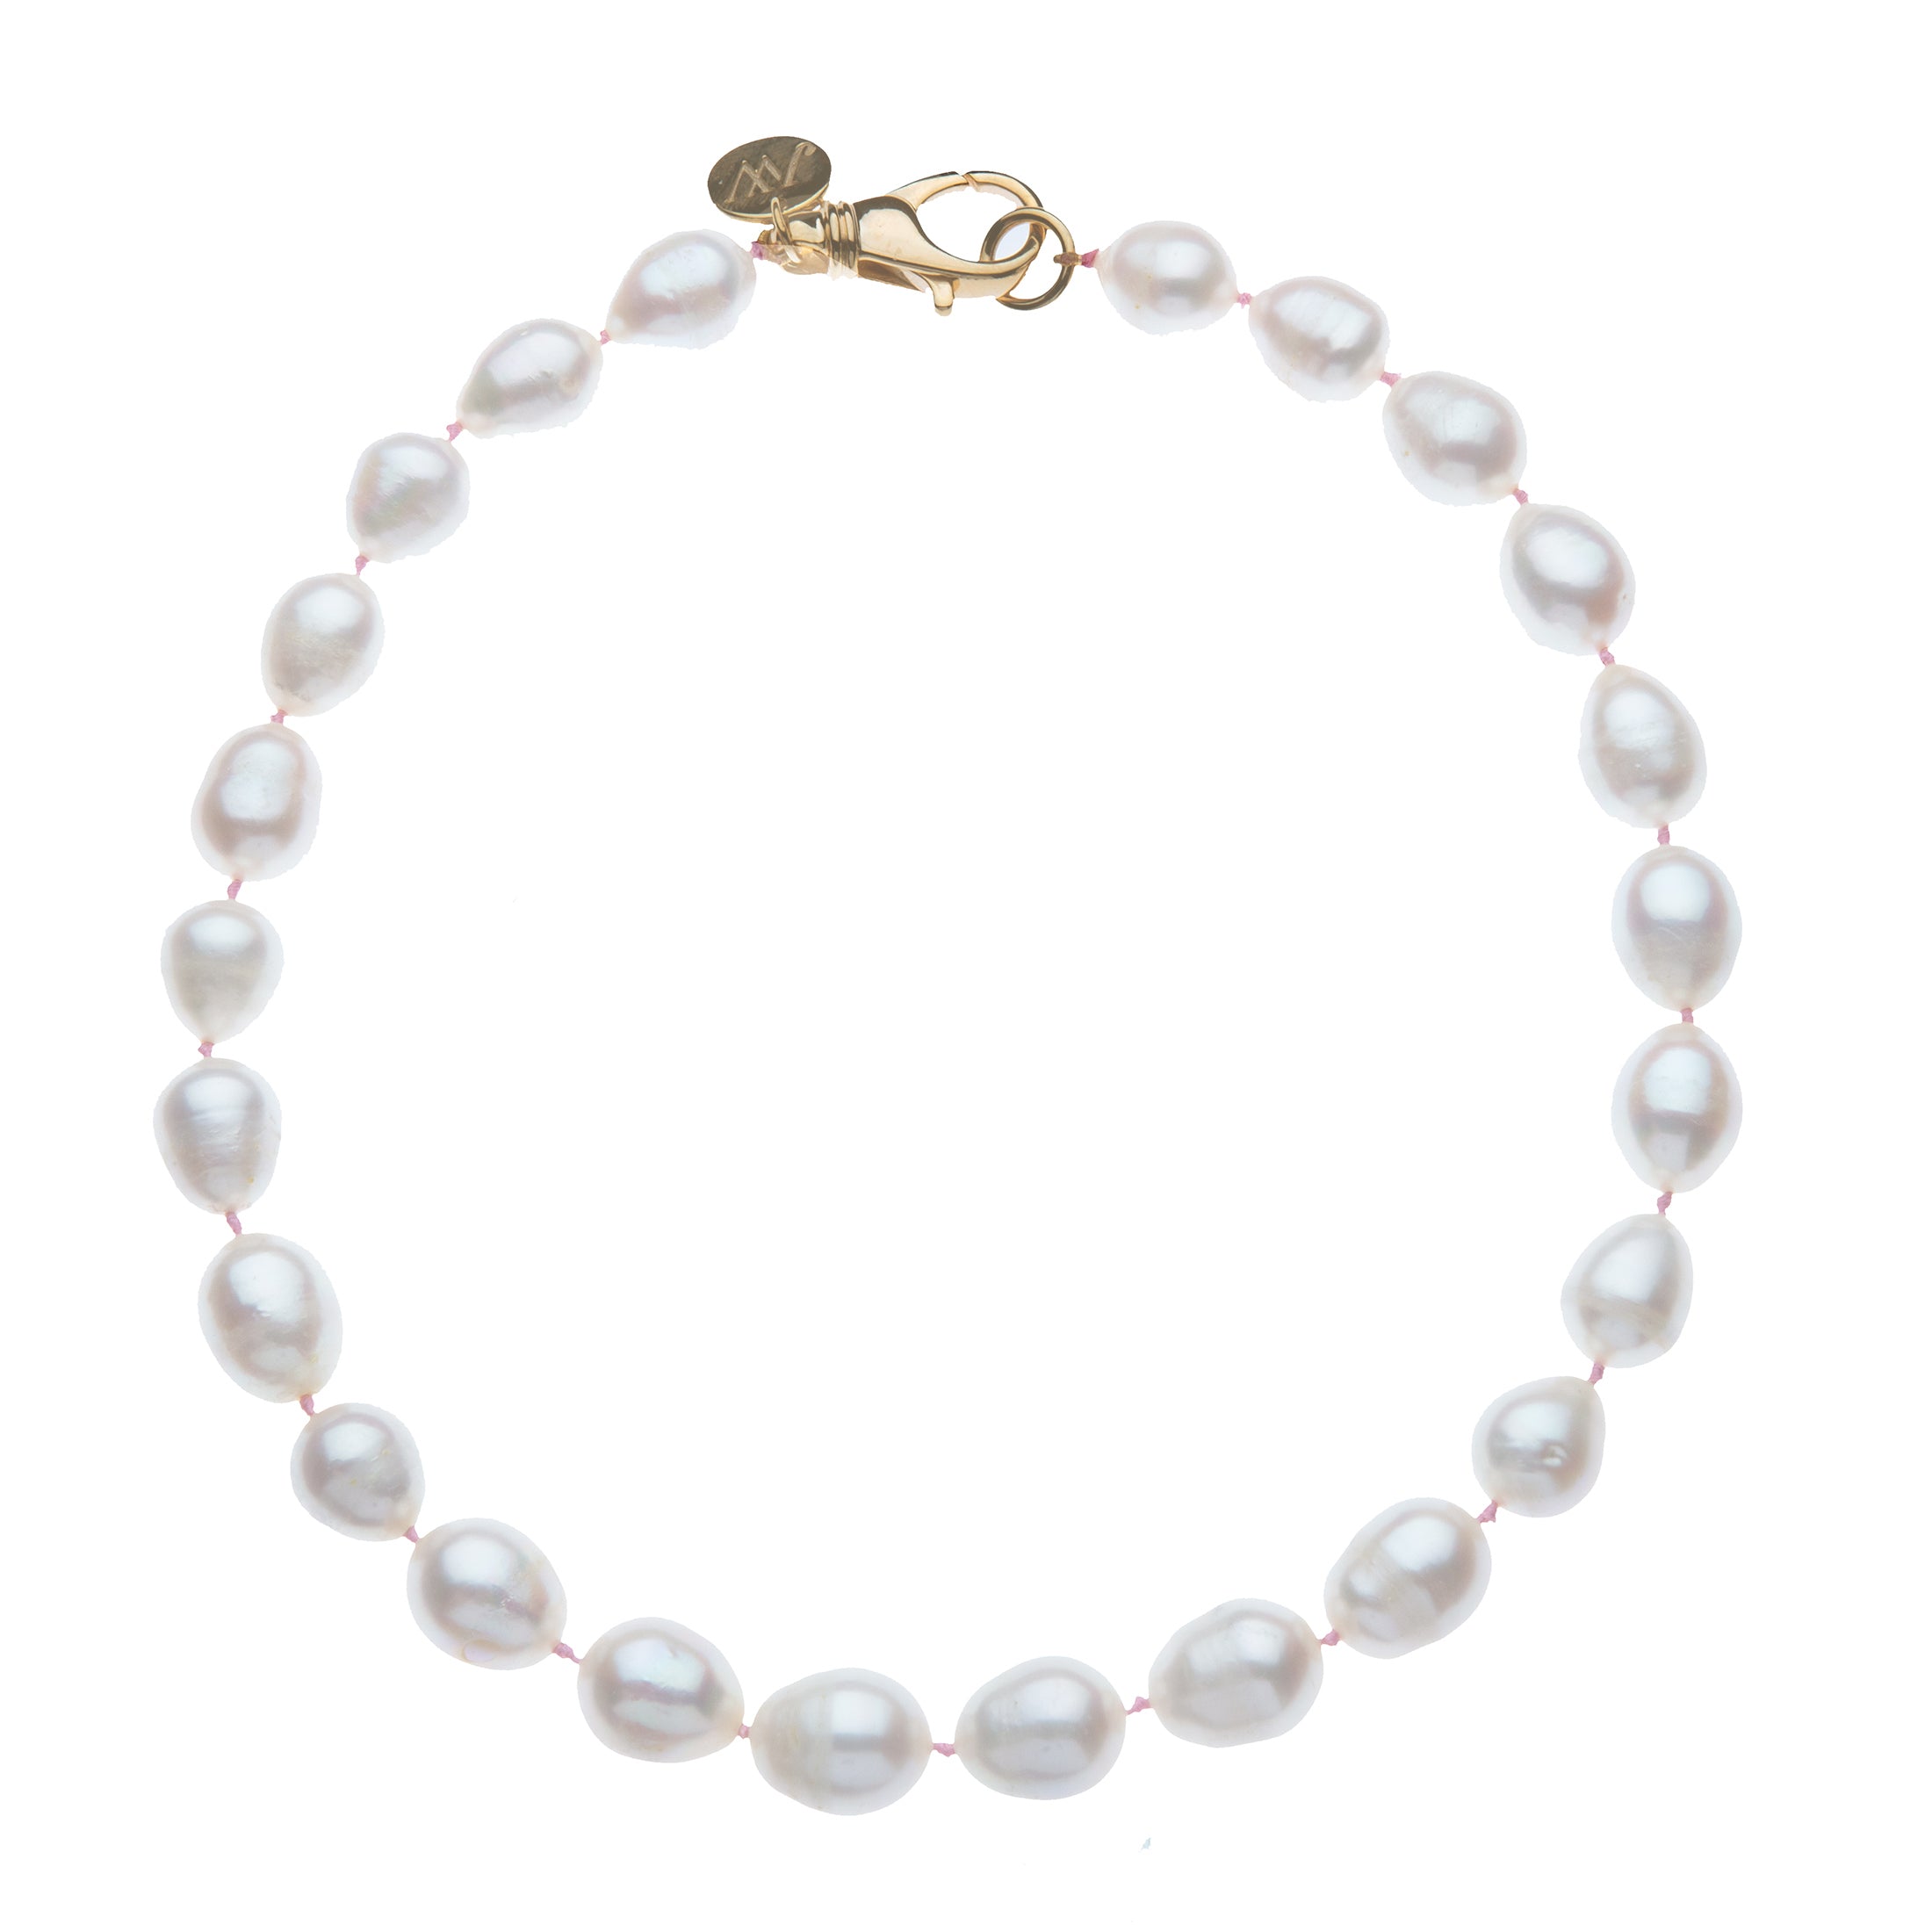 The Rainbow Pearls - Hand-knotted Freshwater Pearl Necklace | Necklaces